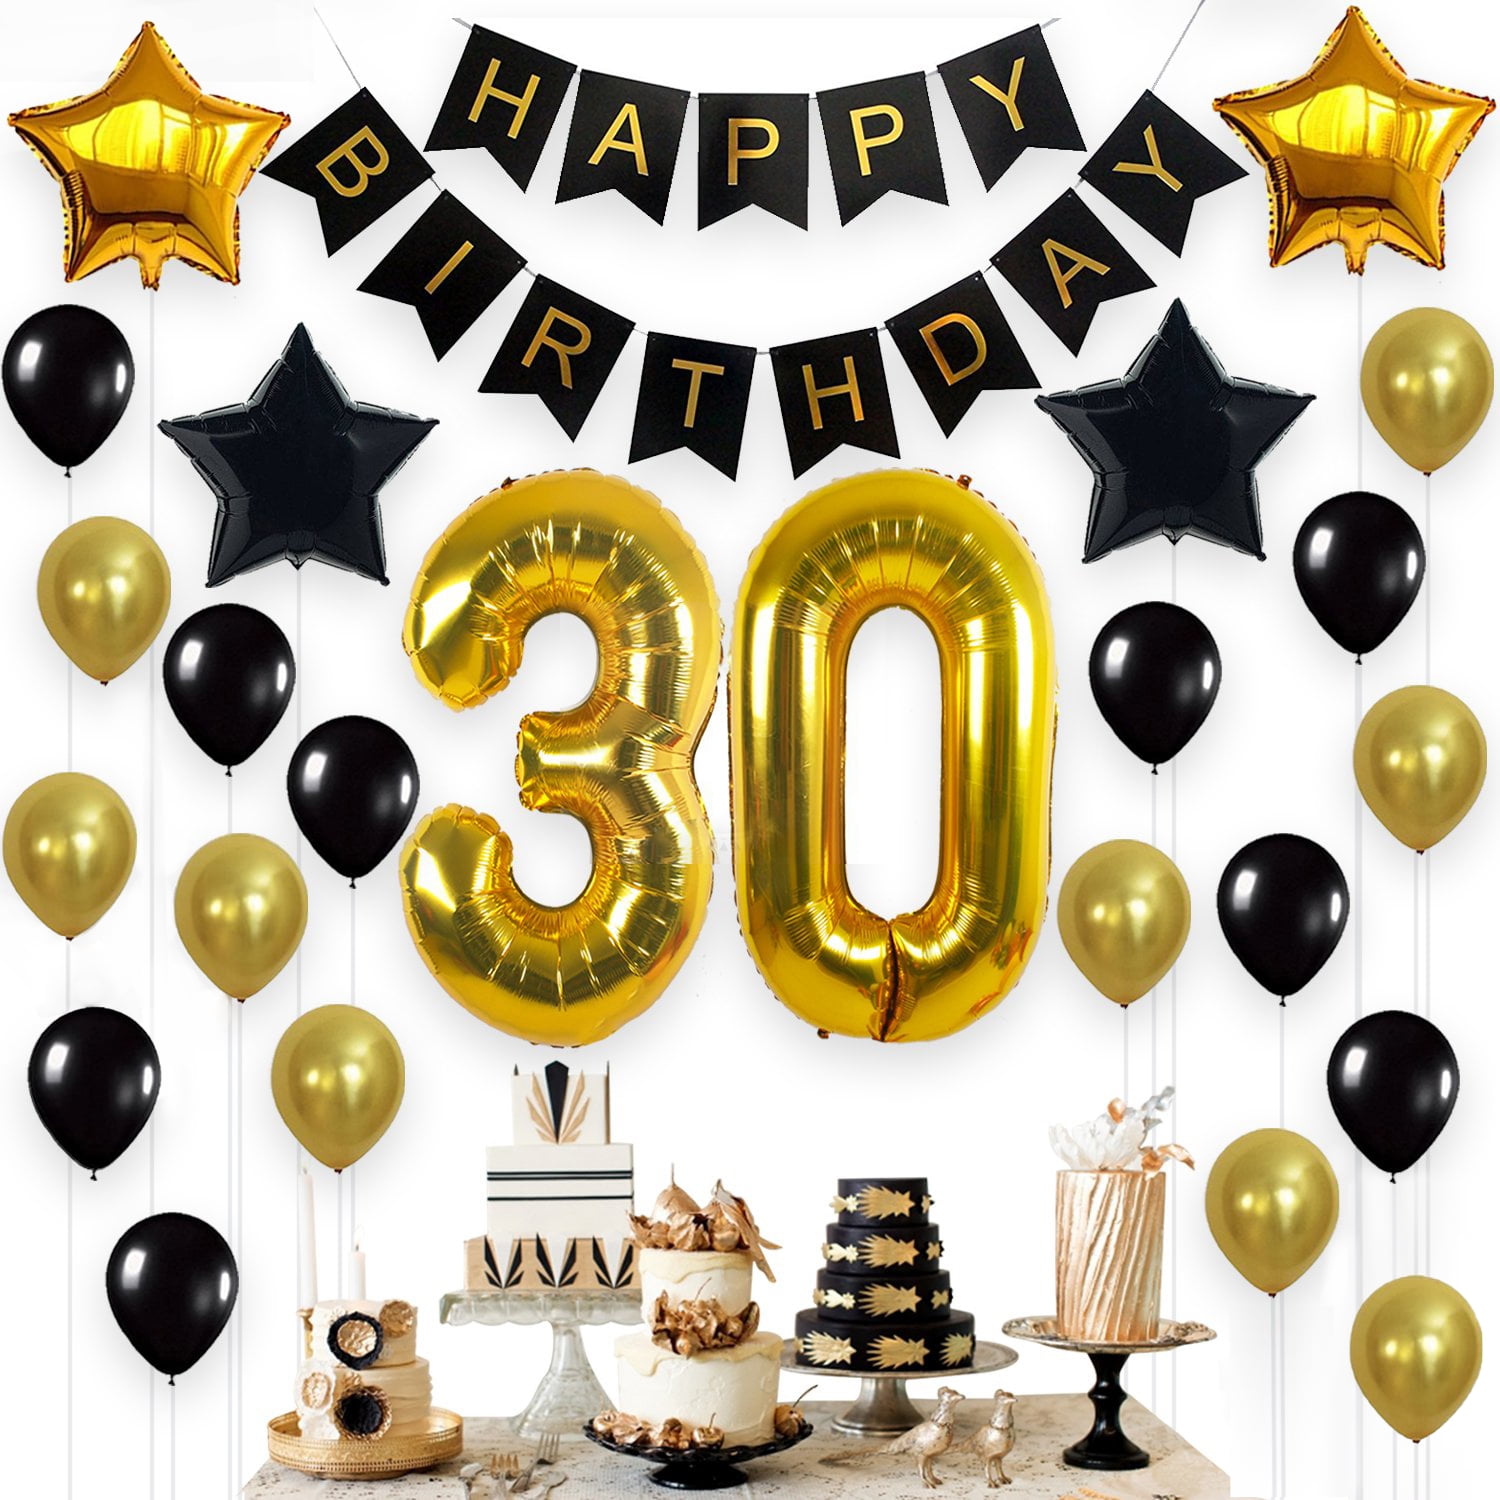 6 PACK BALLOON DISPLAY 70TH  BIRTHDAY TABLE CENTREPIECE BLACK AND GOLD 